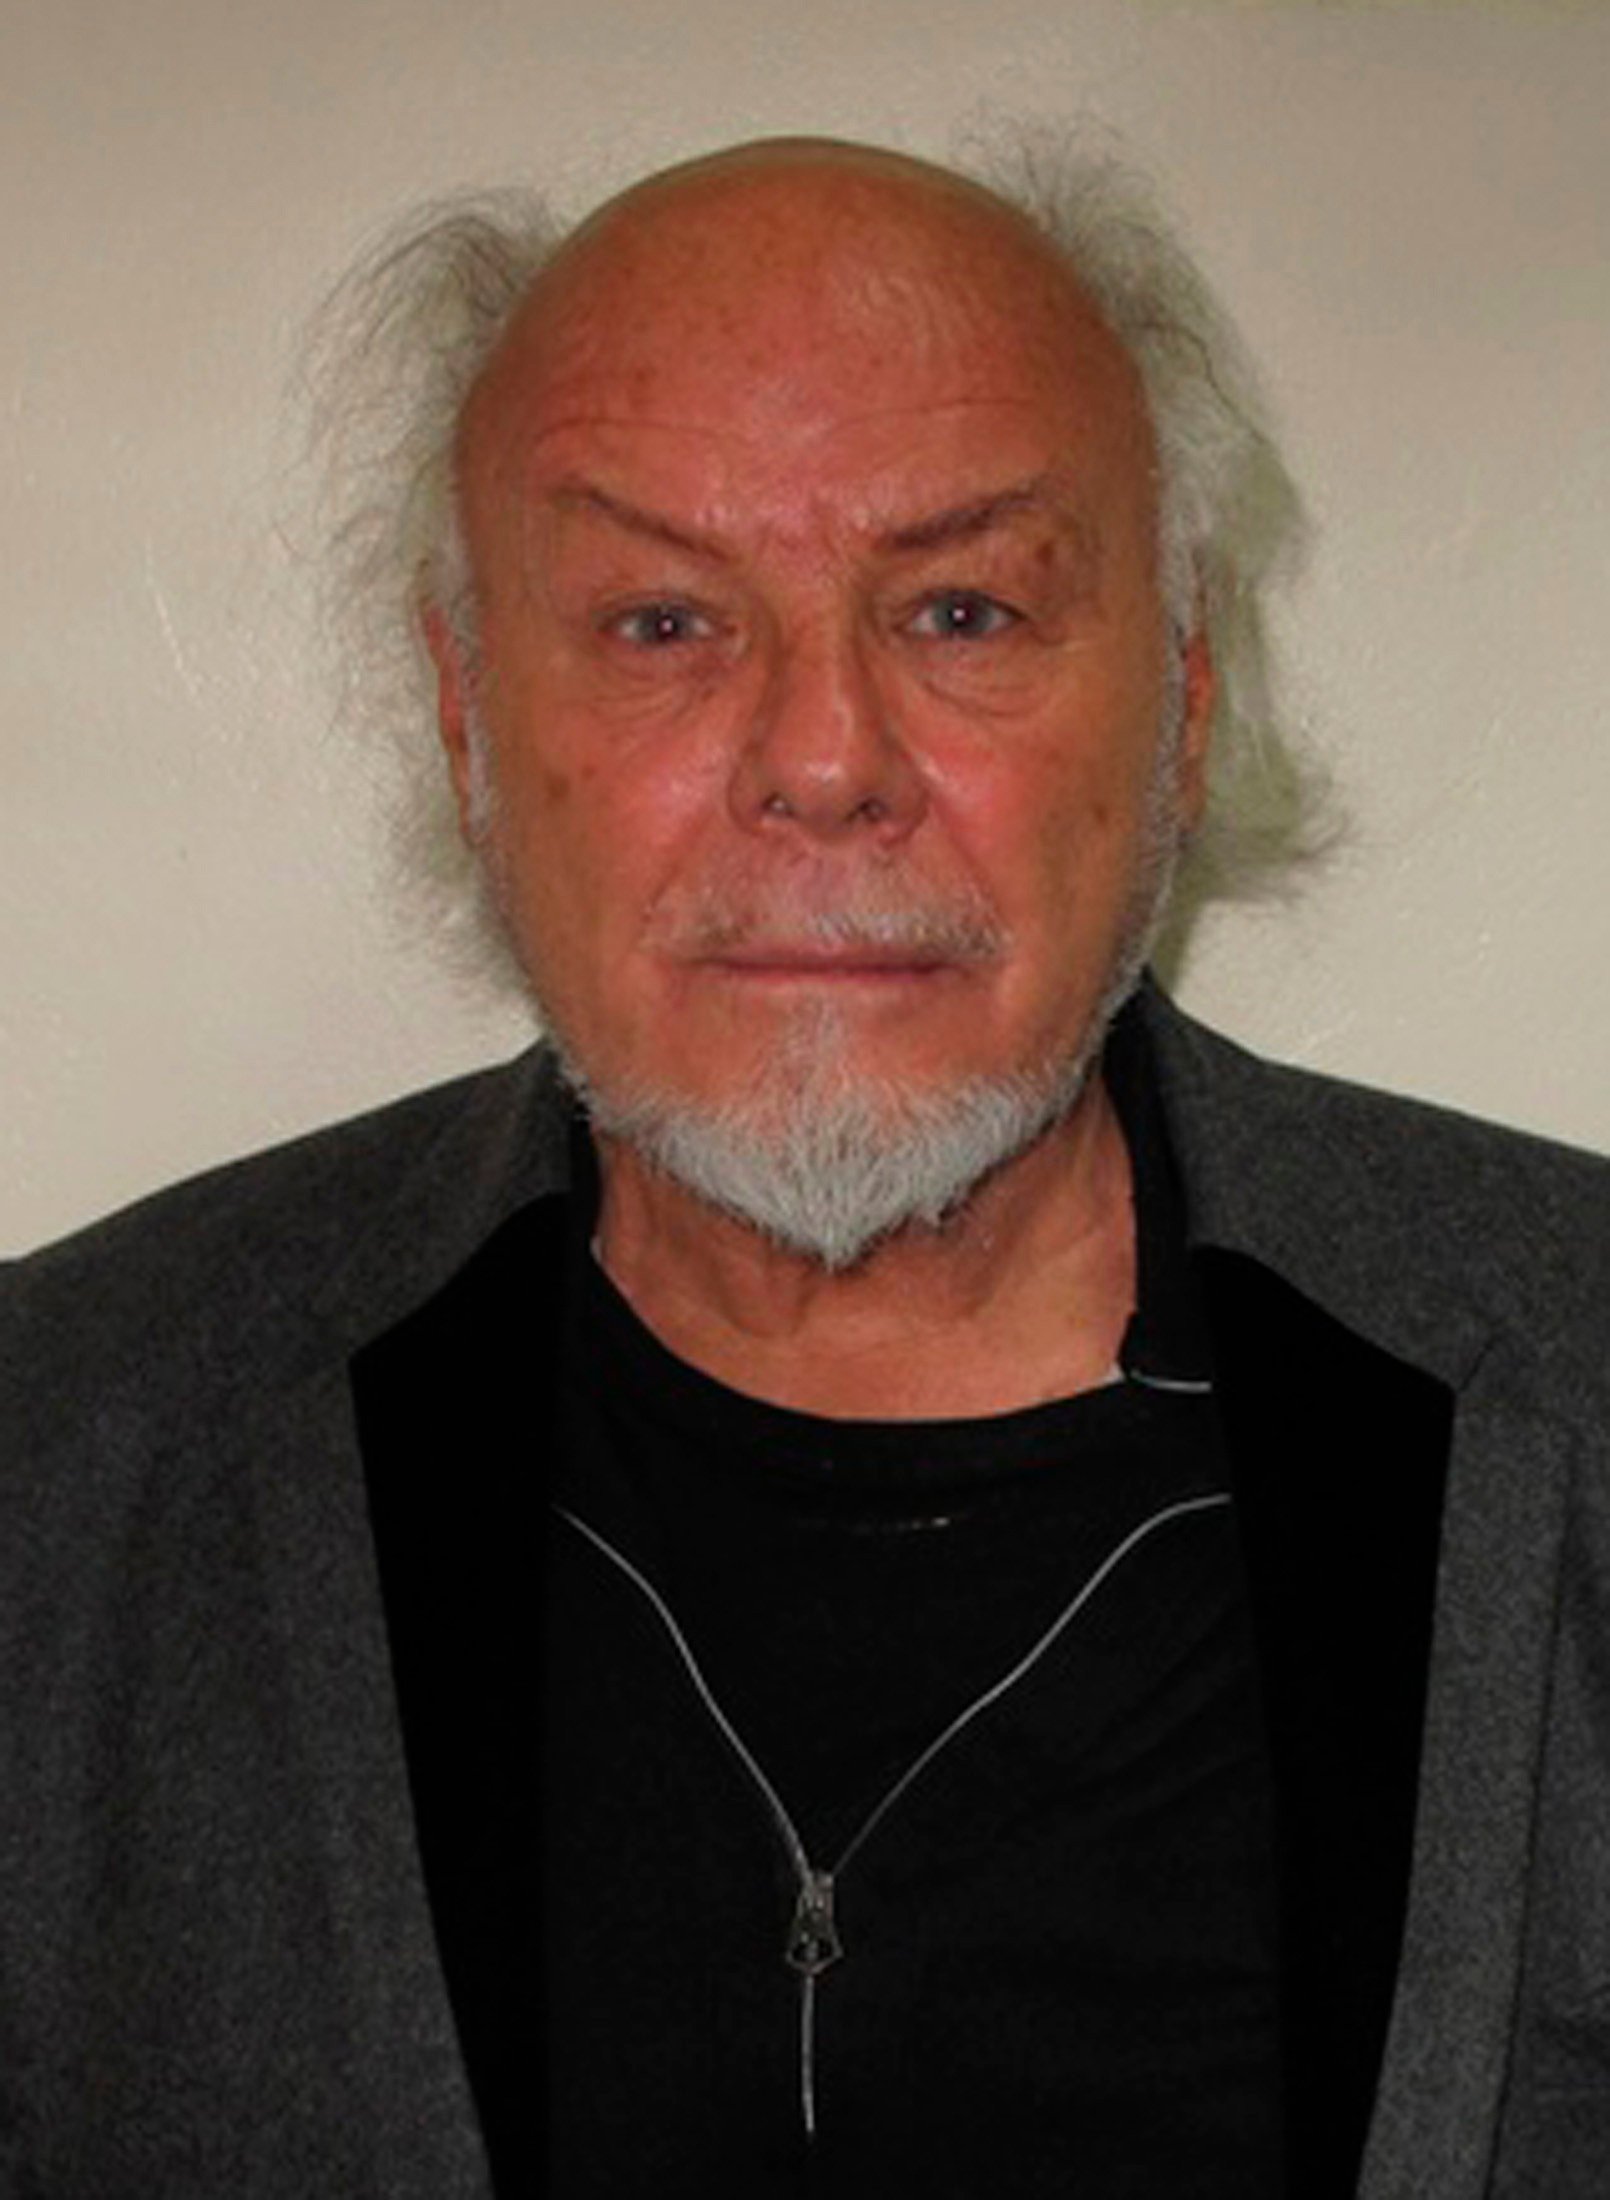 Former British pop star Gary Glitter is seen in this undated handout photograph released by the Metropolitan Police in London on February 27, 2015. Photo: Reuters